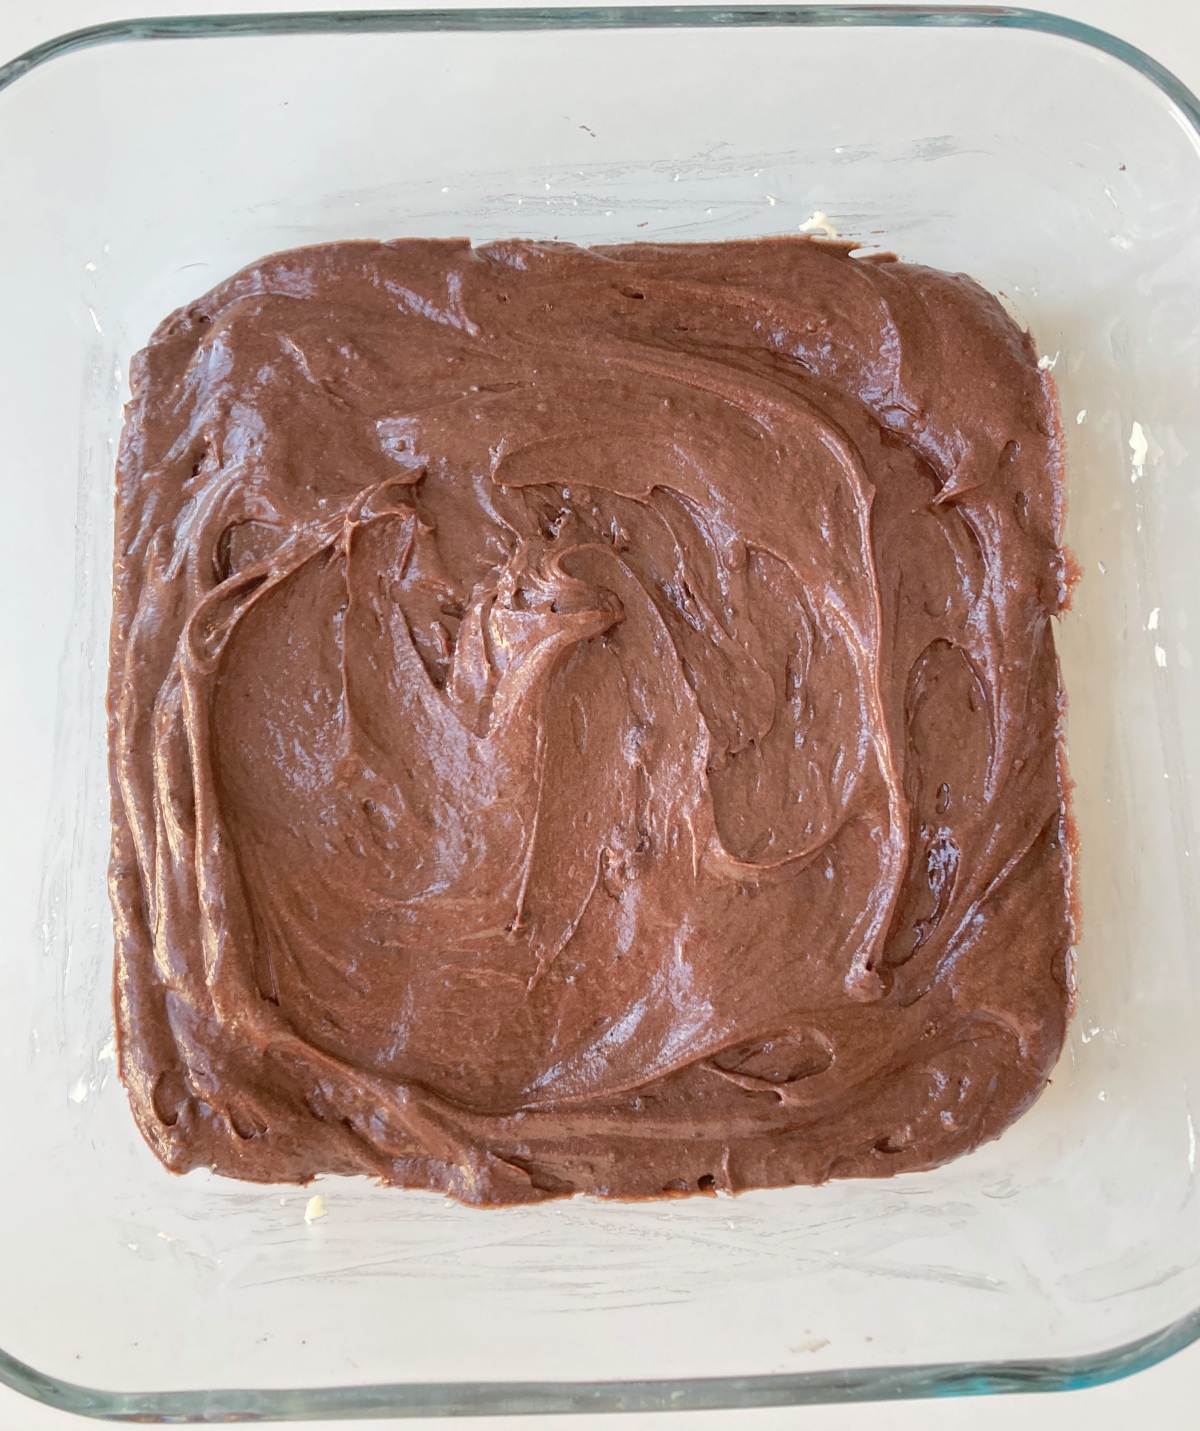 Preheat oven to 350˚F. In a large bowl sift together flour, cocoa powder, baking powder, and 1/4 teaspoon sea salt. In another bowl mix together butter and sugar, then add eggs one at a time. Stir in vanilla, then add dry ingredients to wet. Pour into a greased and lined 8